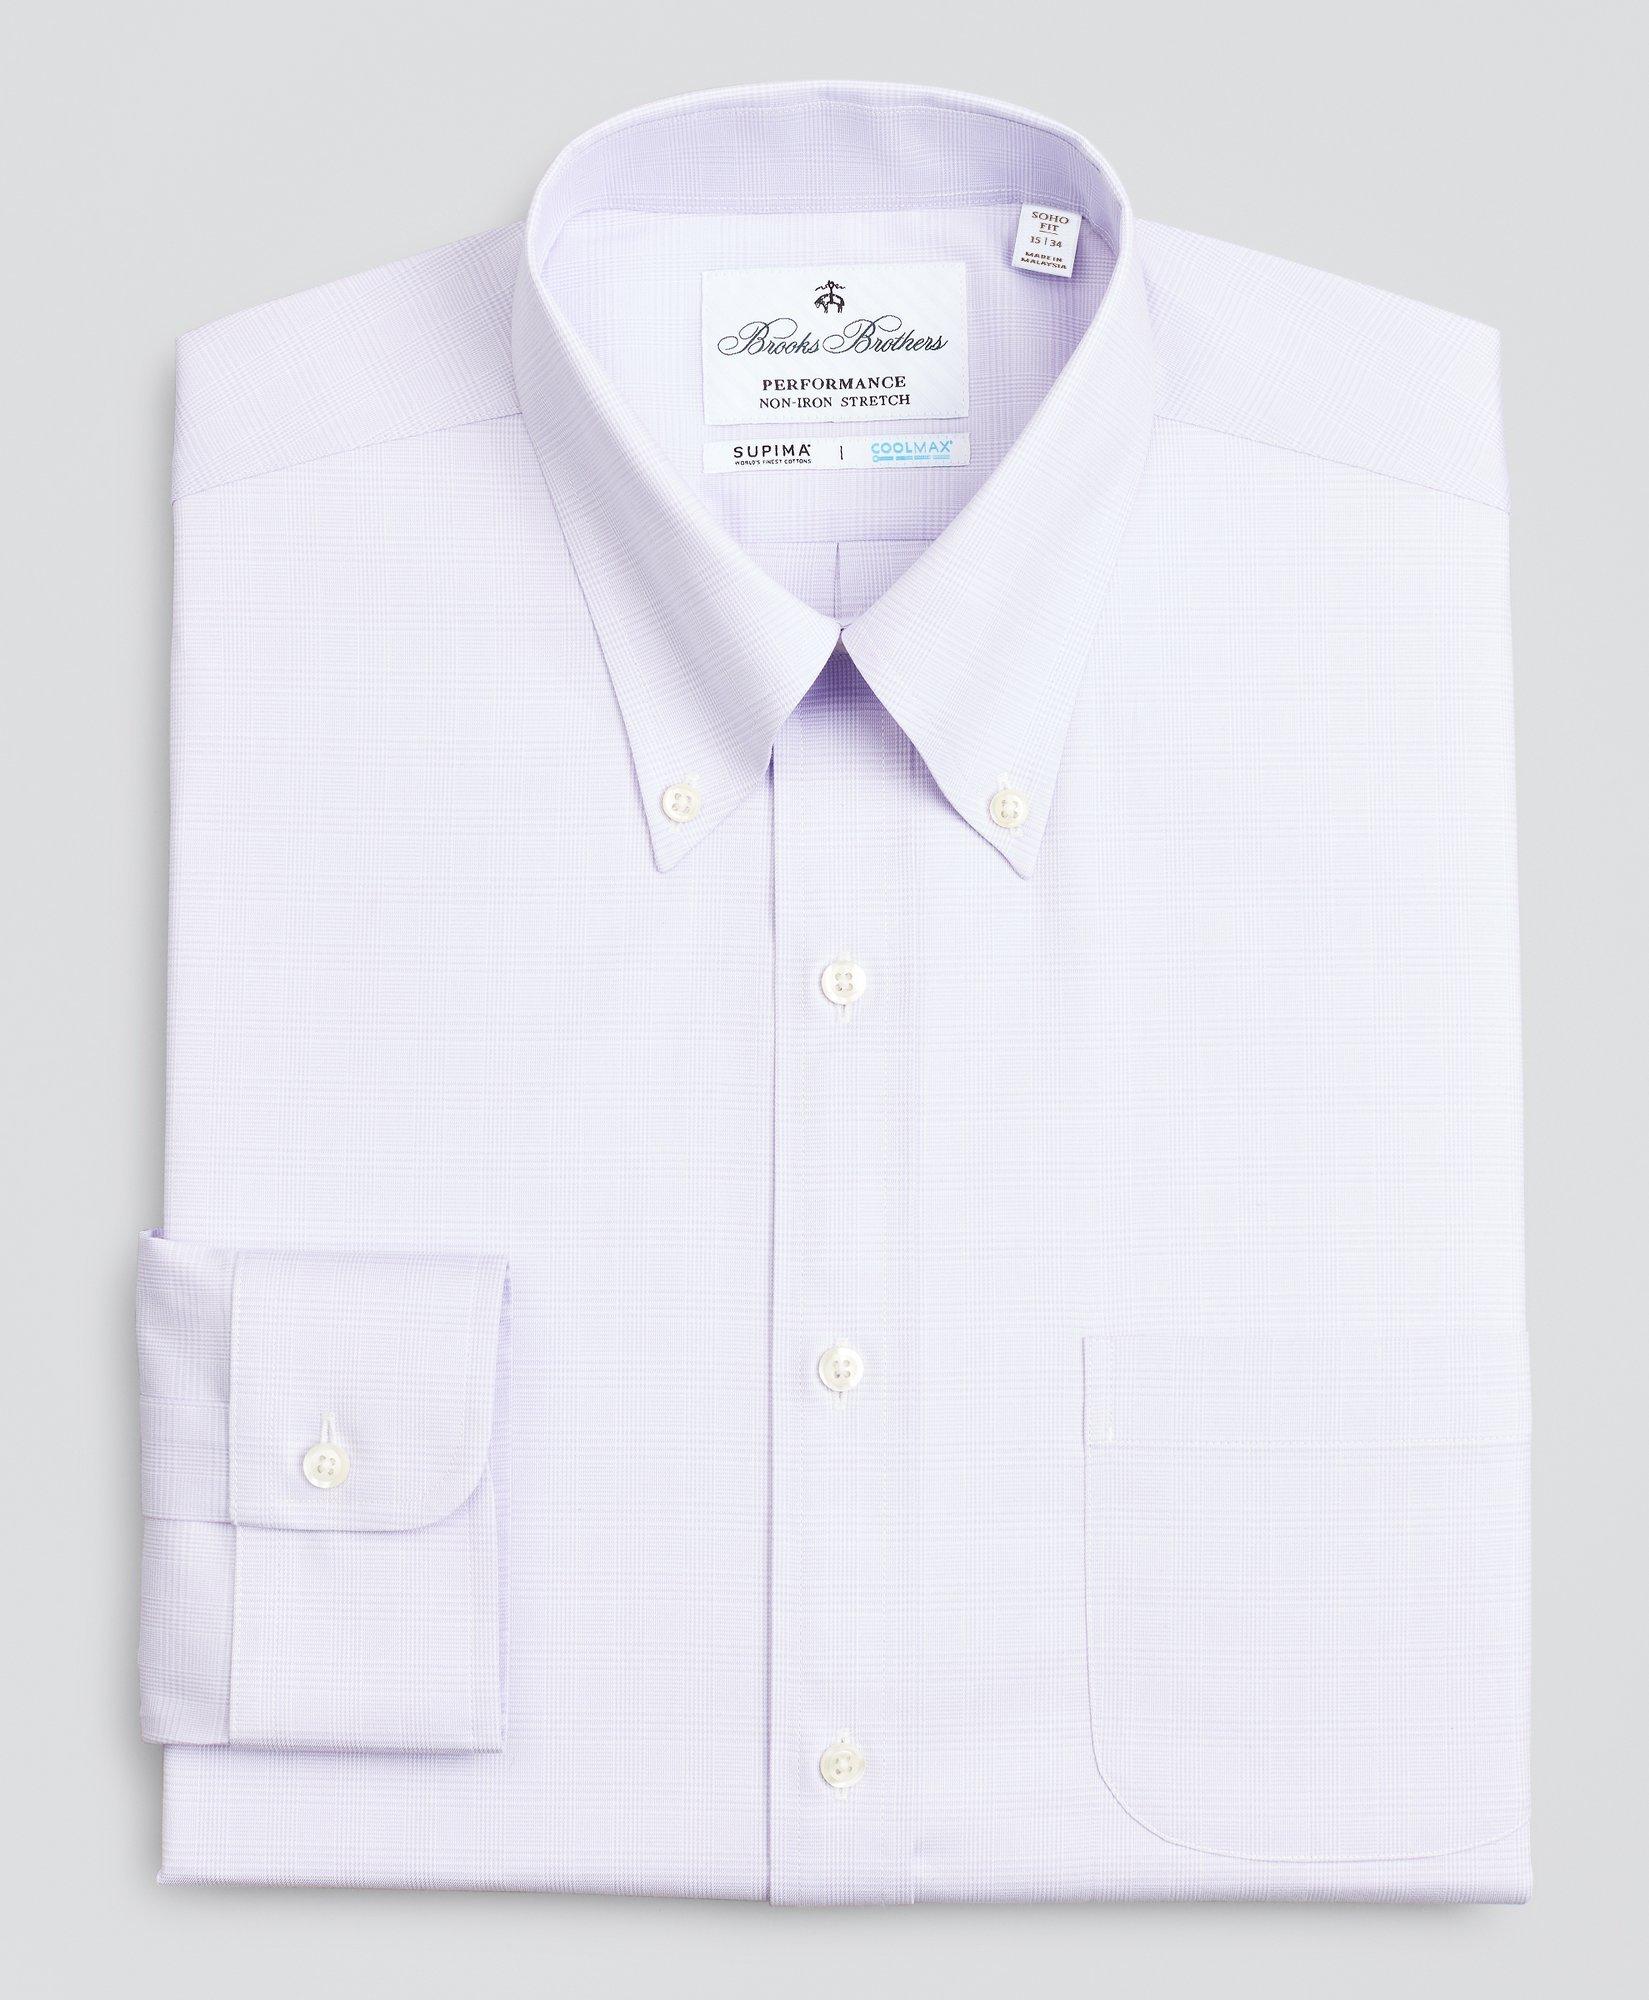 Zus Kameraad aanval Soho Extra-Slim Fit Dress Shirt, Performance Non-Iron with COOLMAX®,  Button-Down Collar Twill Check